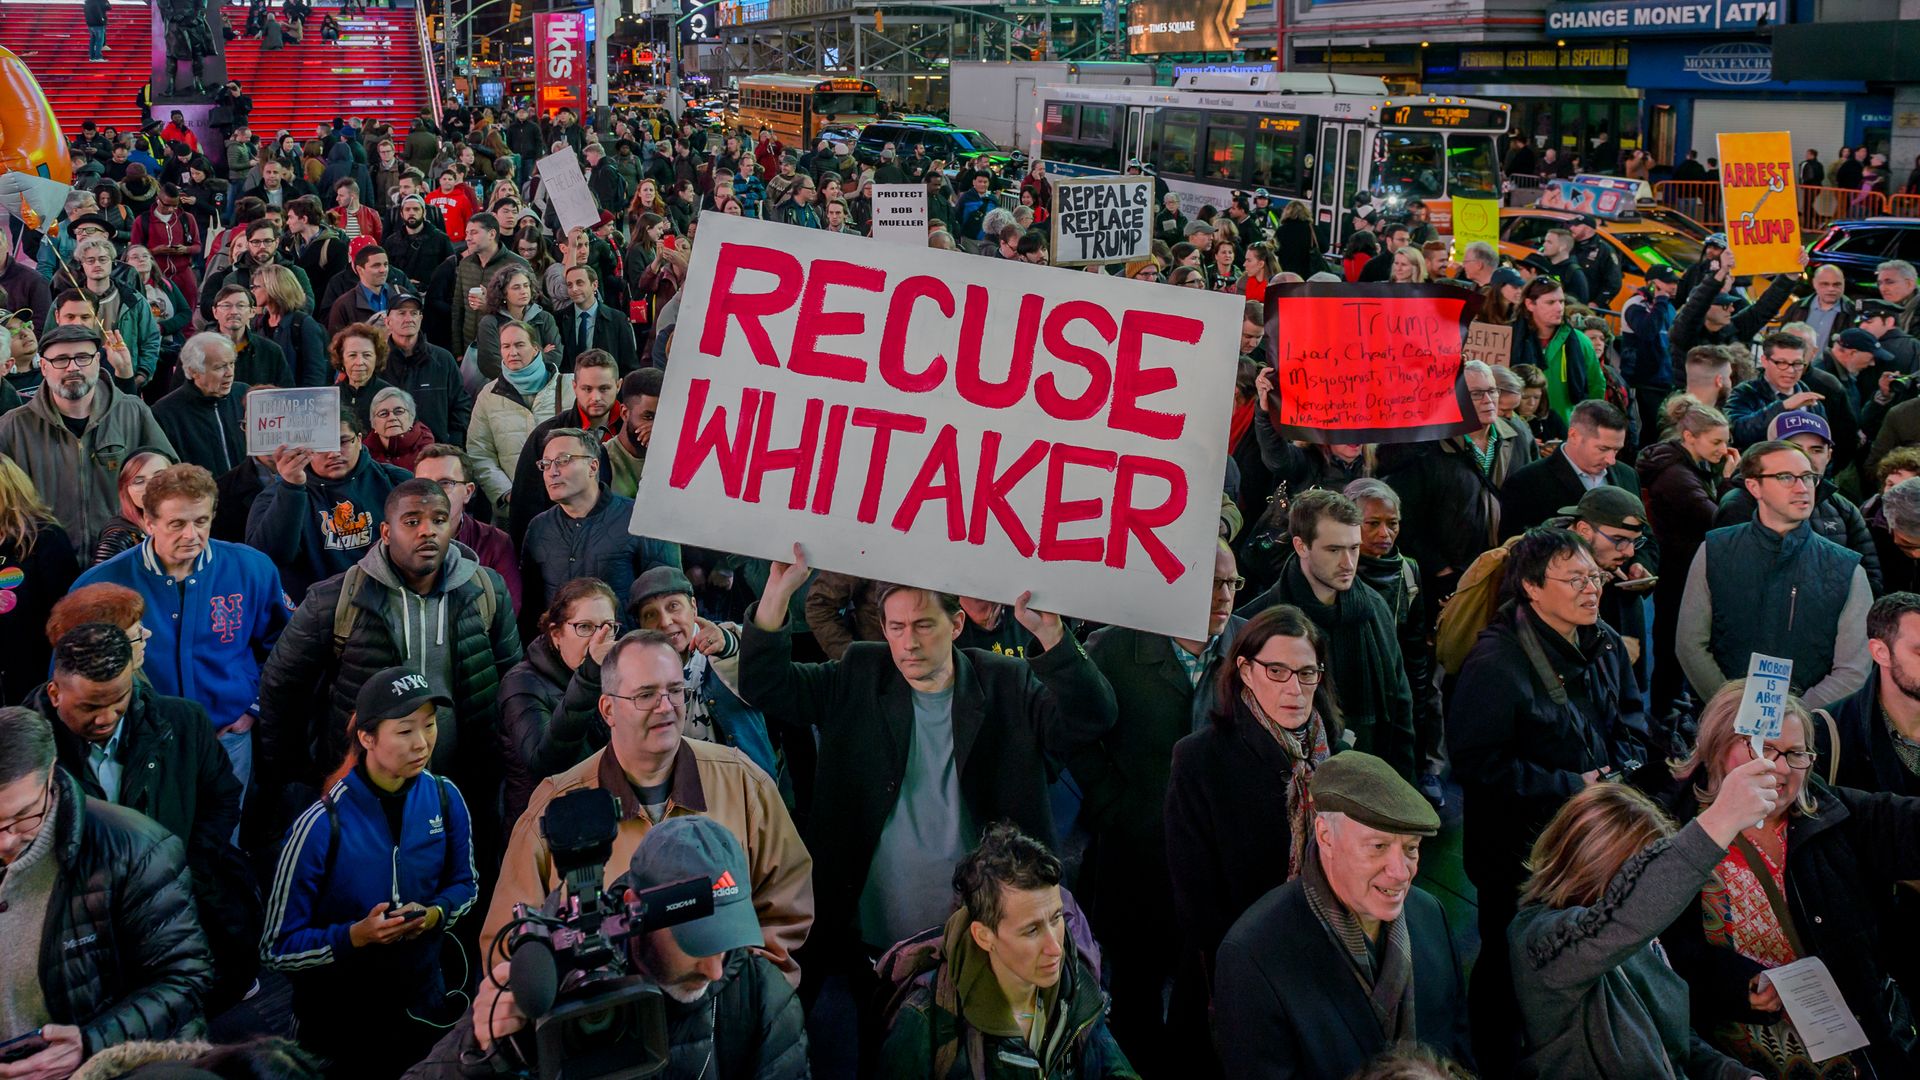 A crowd of people protesting with one big sign that reads, "Recuse Whitaker" in reference to the current acting attorney general matthew whitaker.